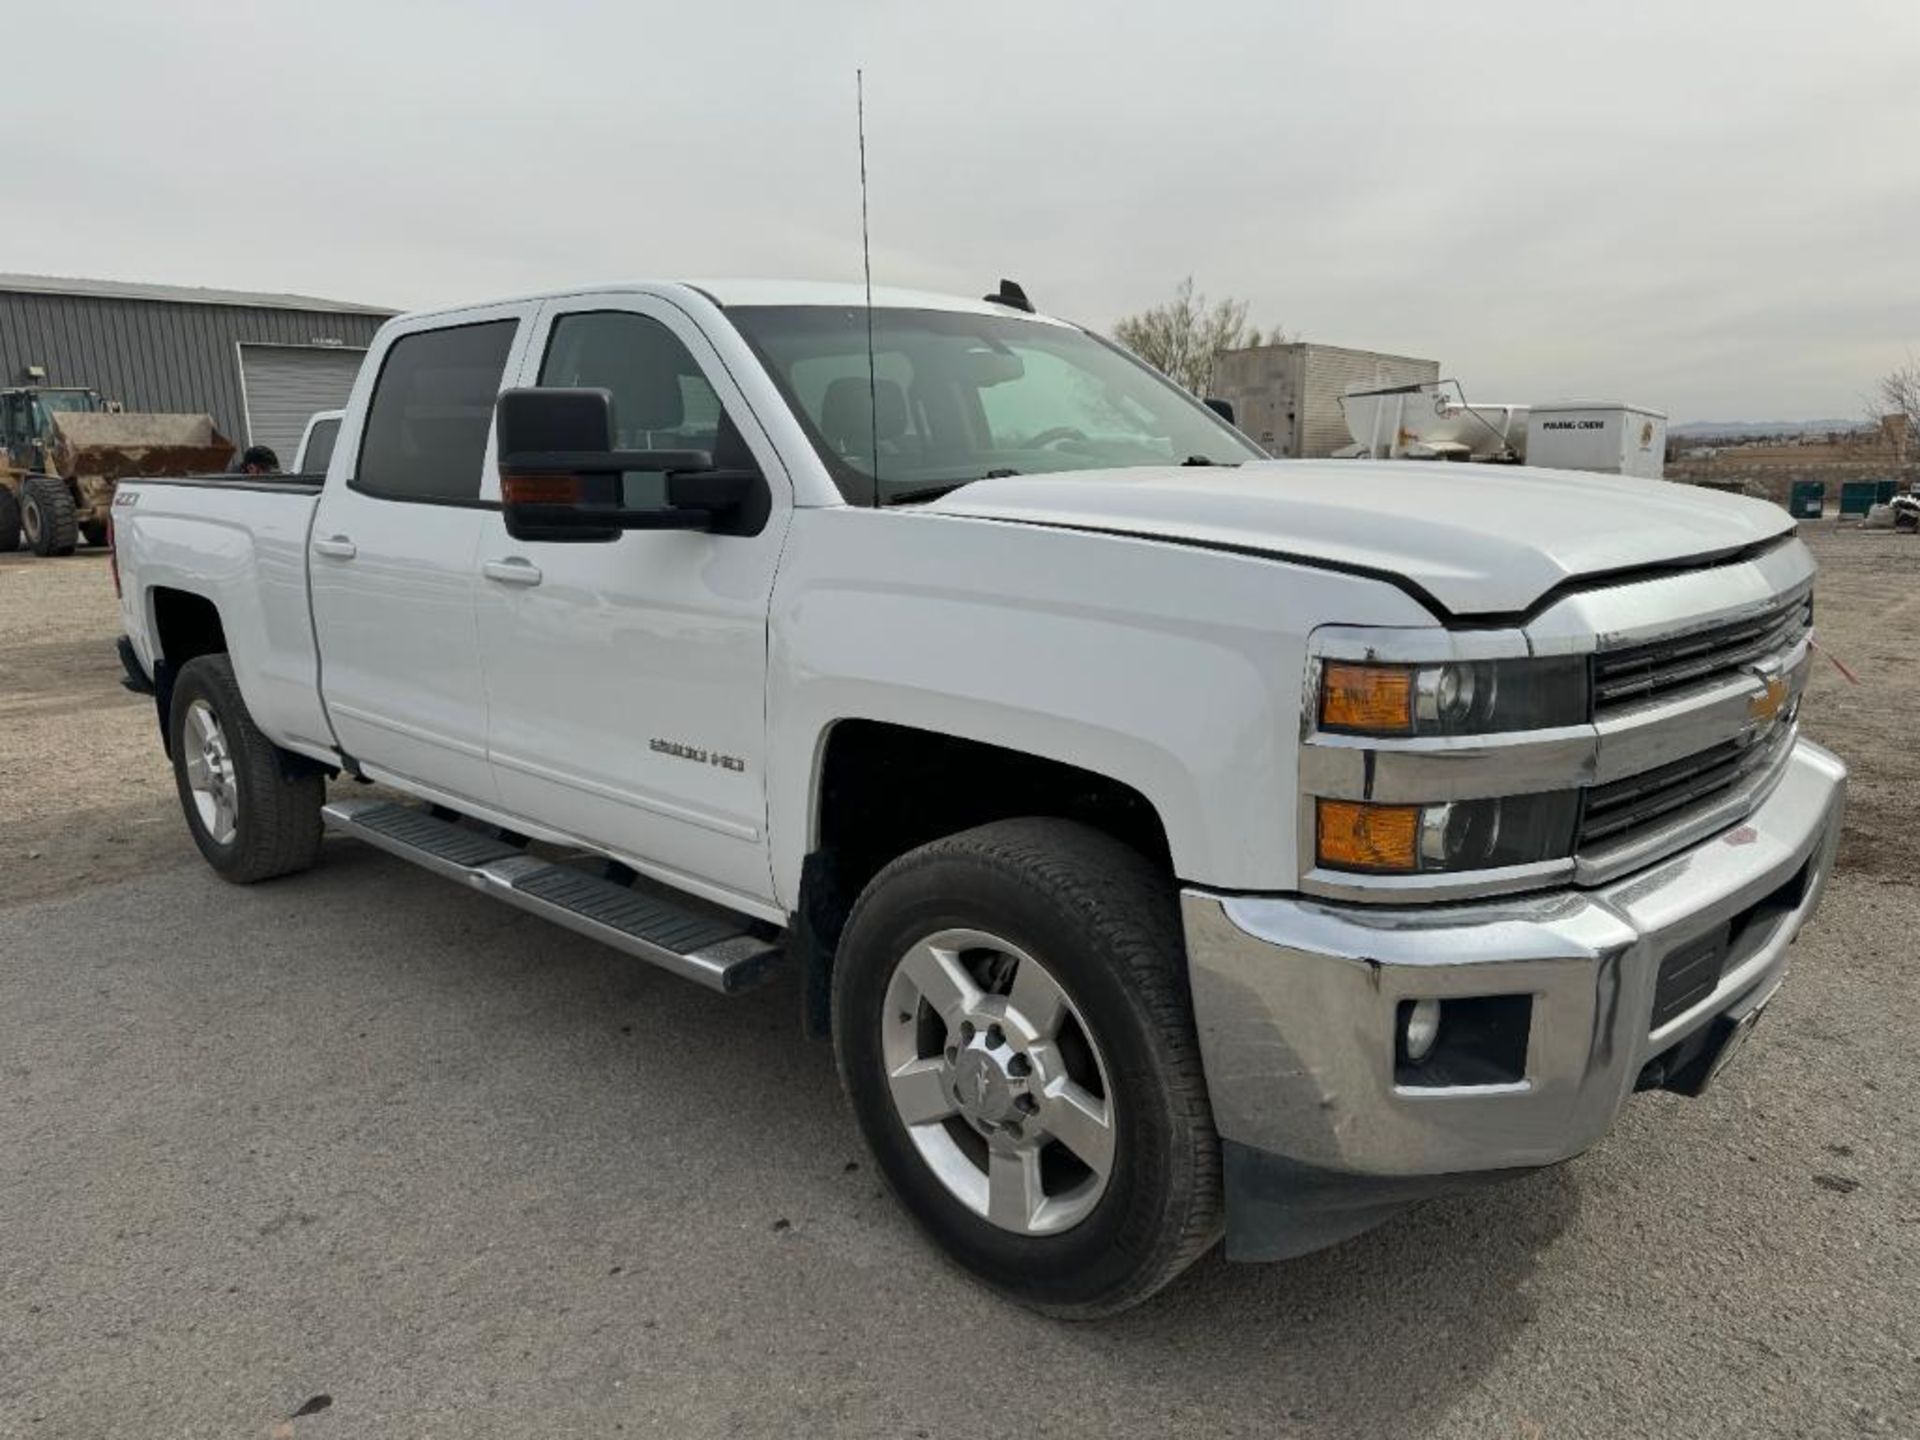 2017 Chevy 2500HD Z71 4X4 Crew Cab Truck - Image 5 of 20